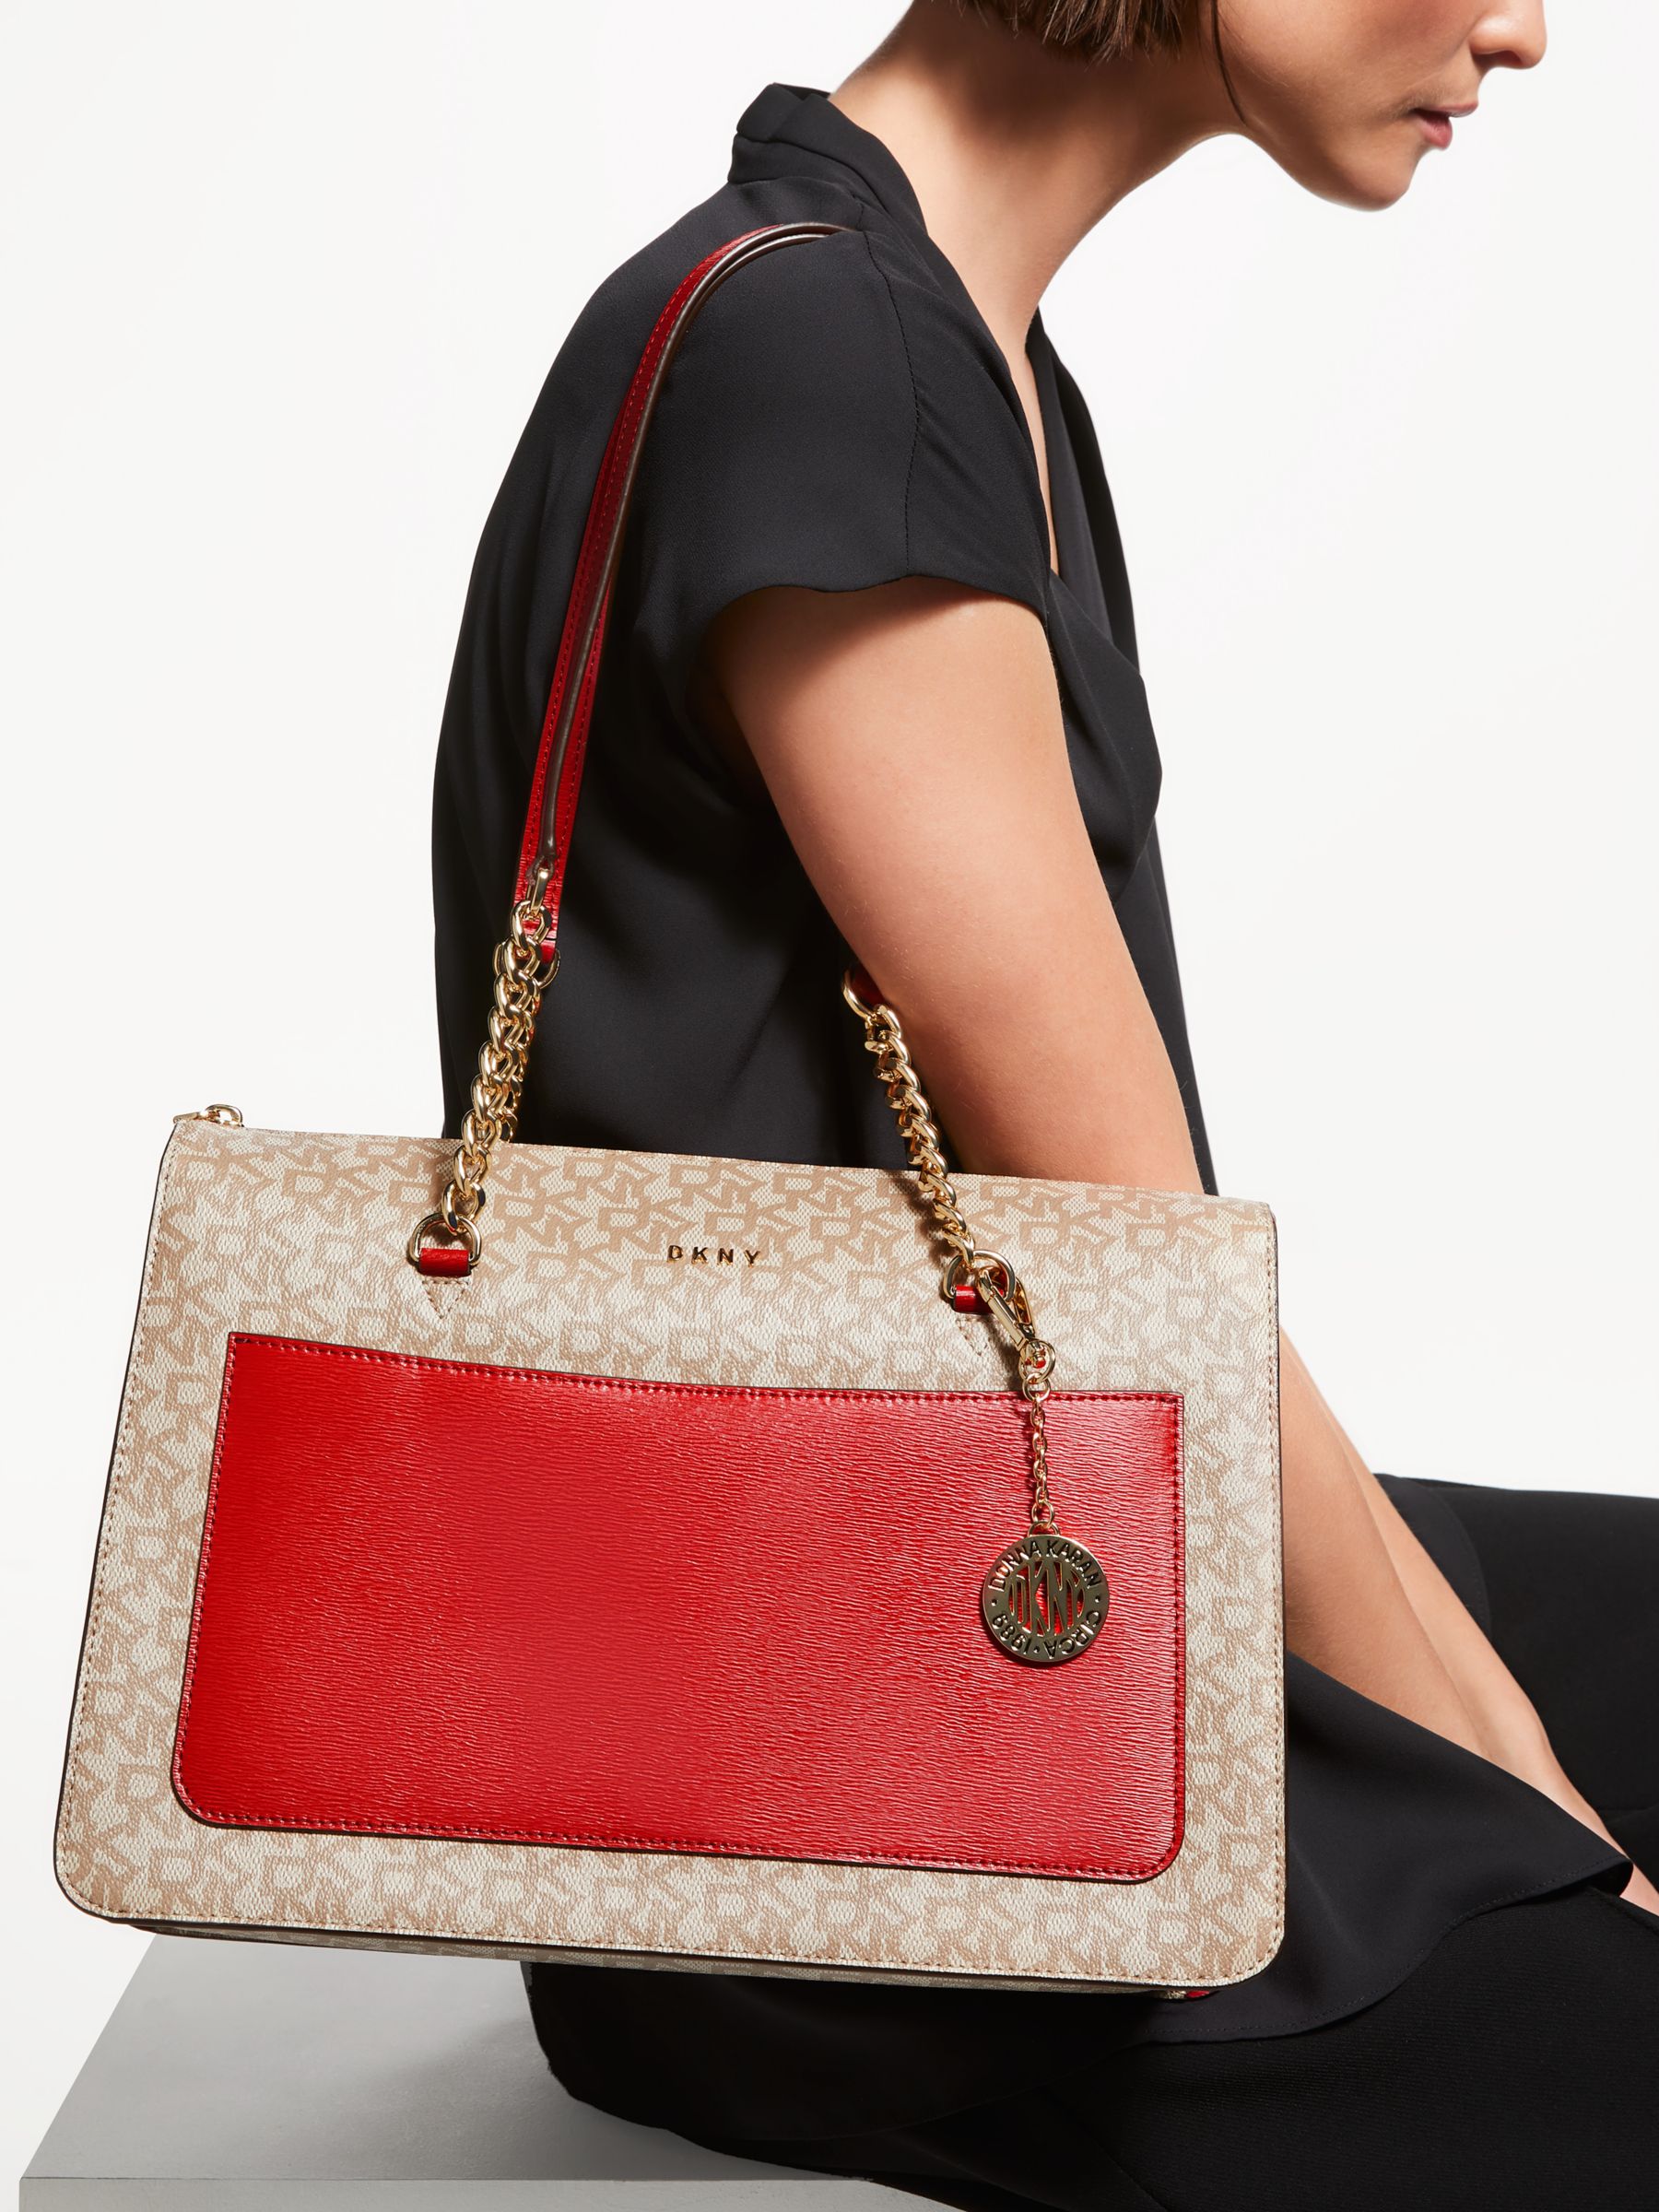 dkny red tote bag